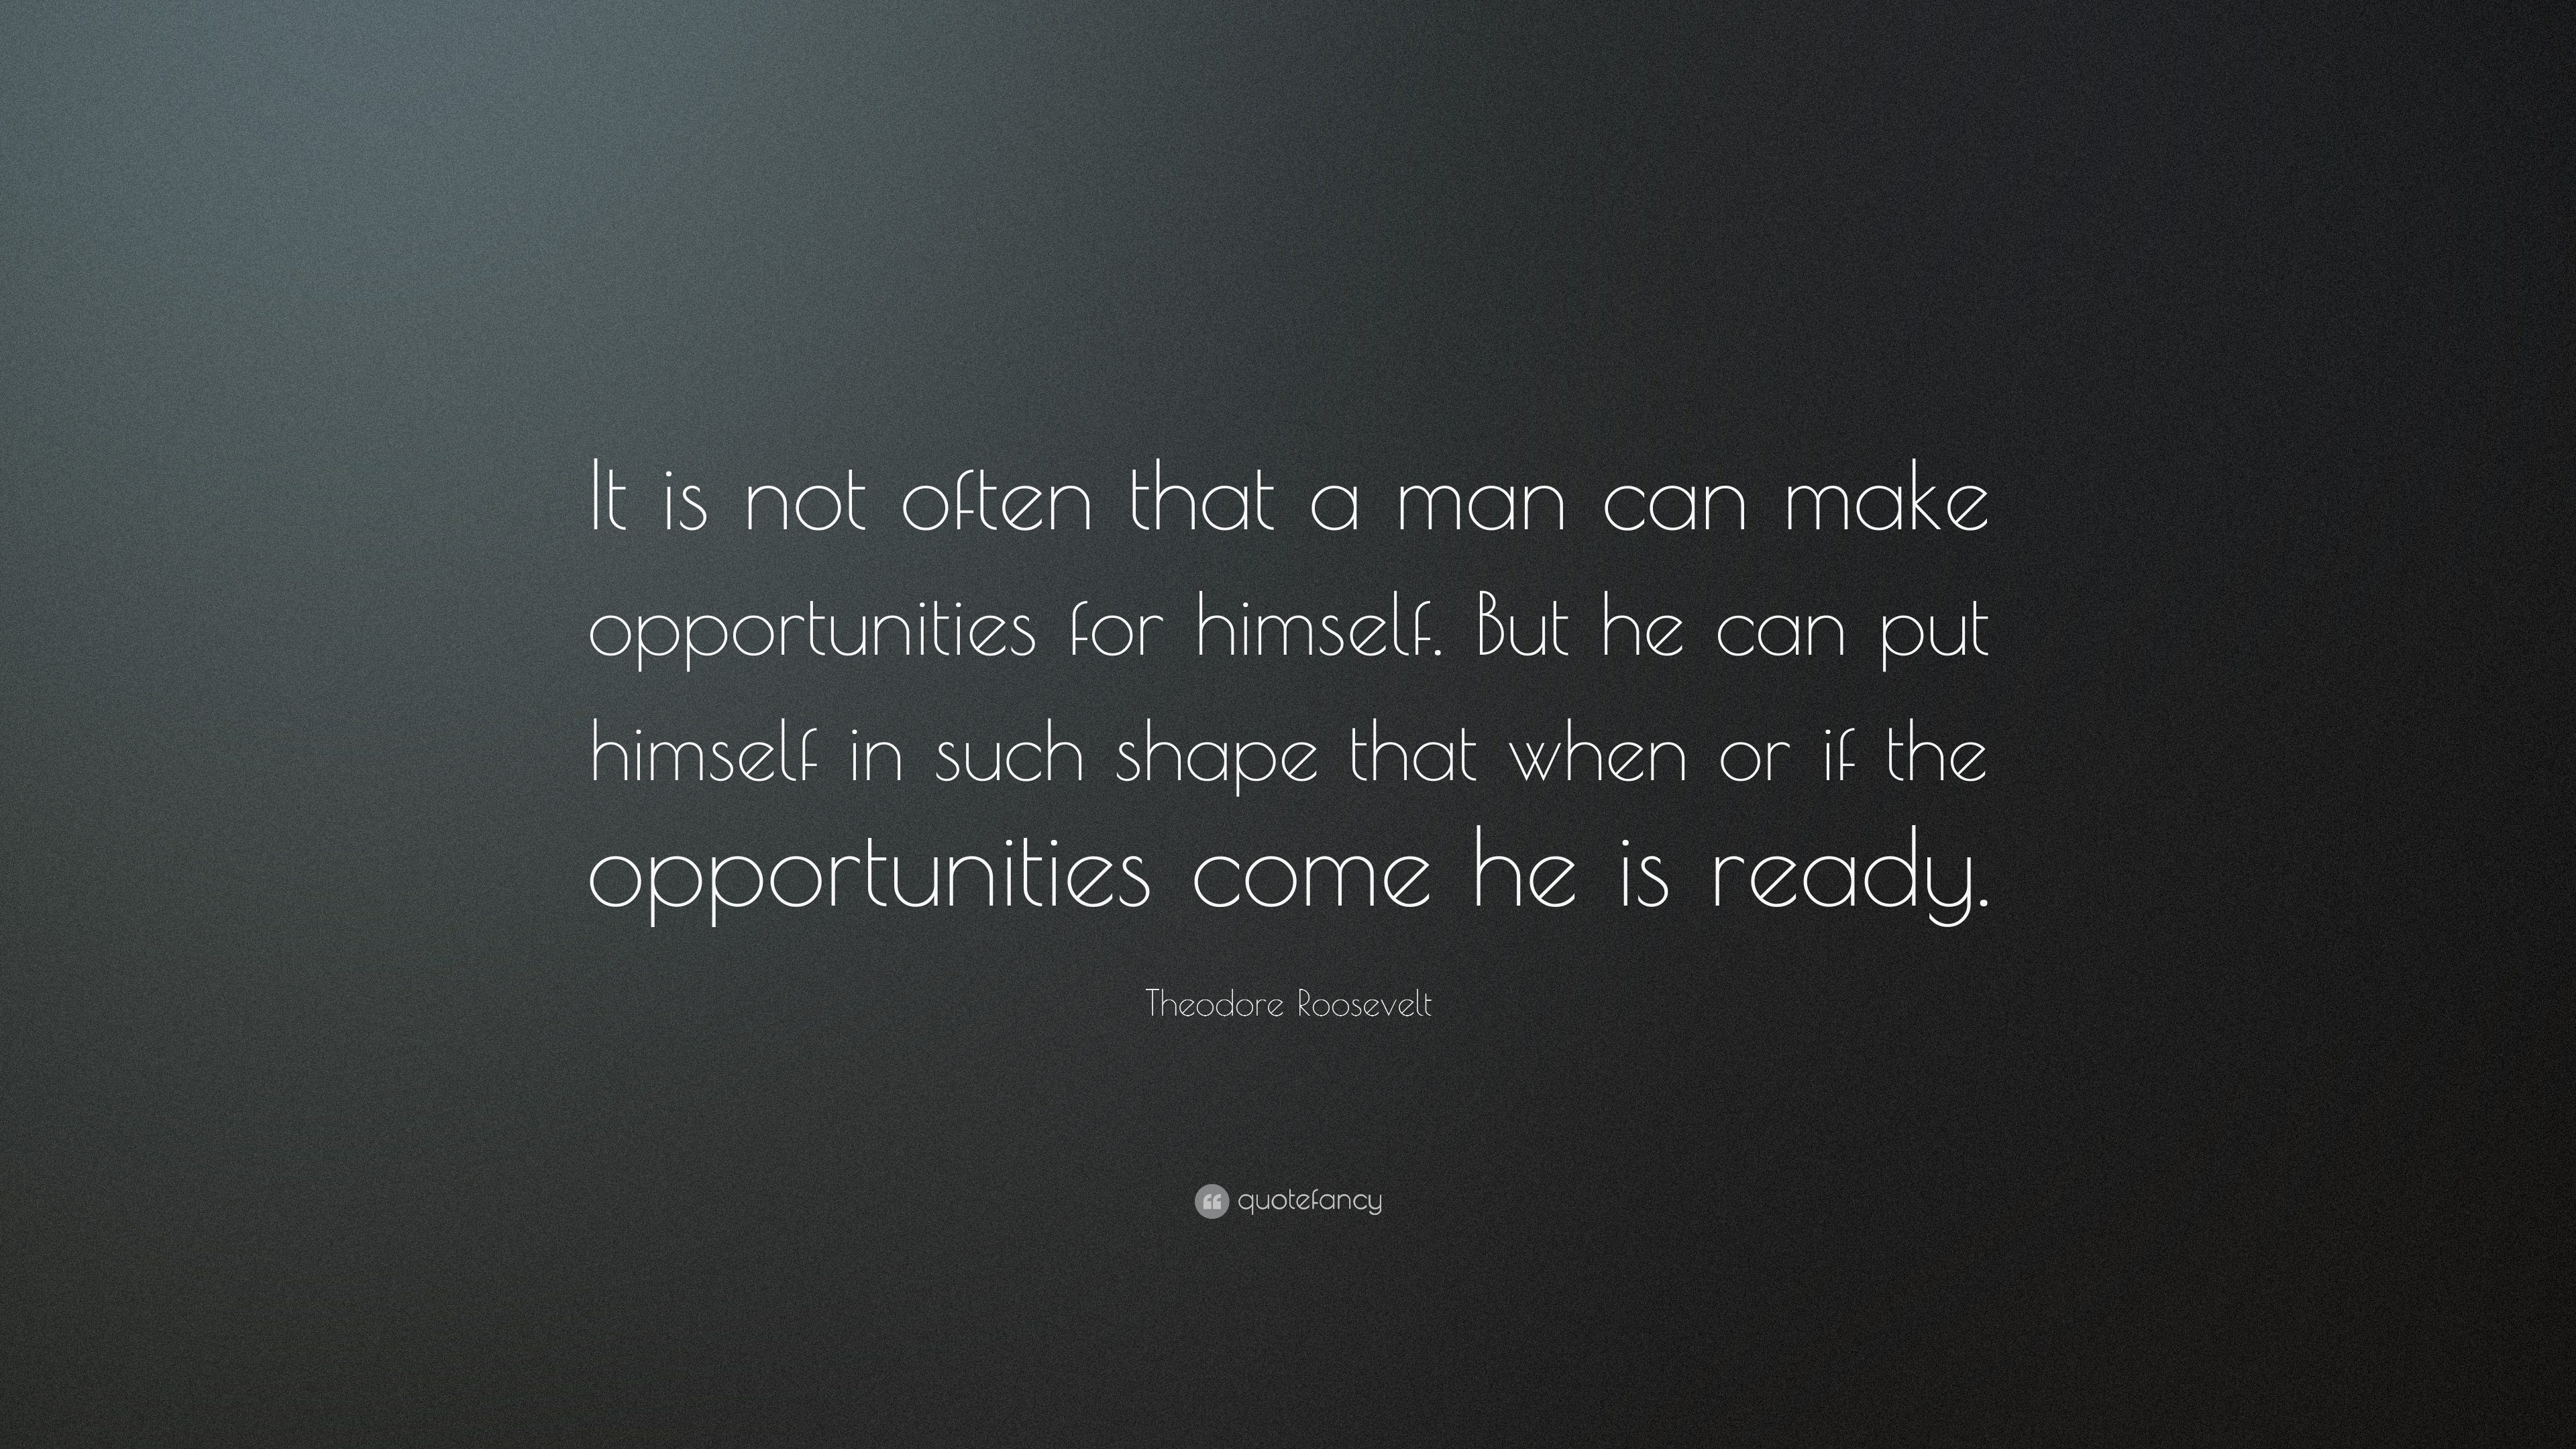 Theodore Roosevelt Quote: “It is not often that a man can make opportunities for himself. But he can put himself in such shape that when or if the.”